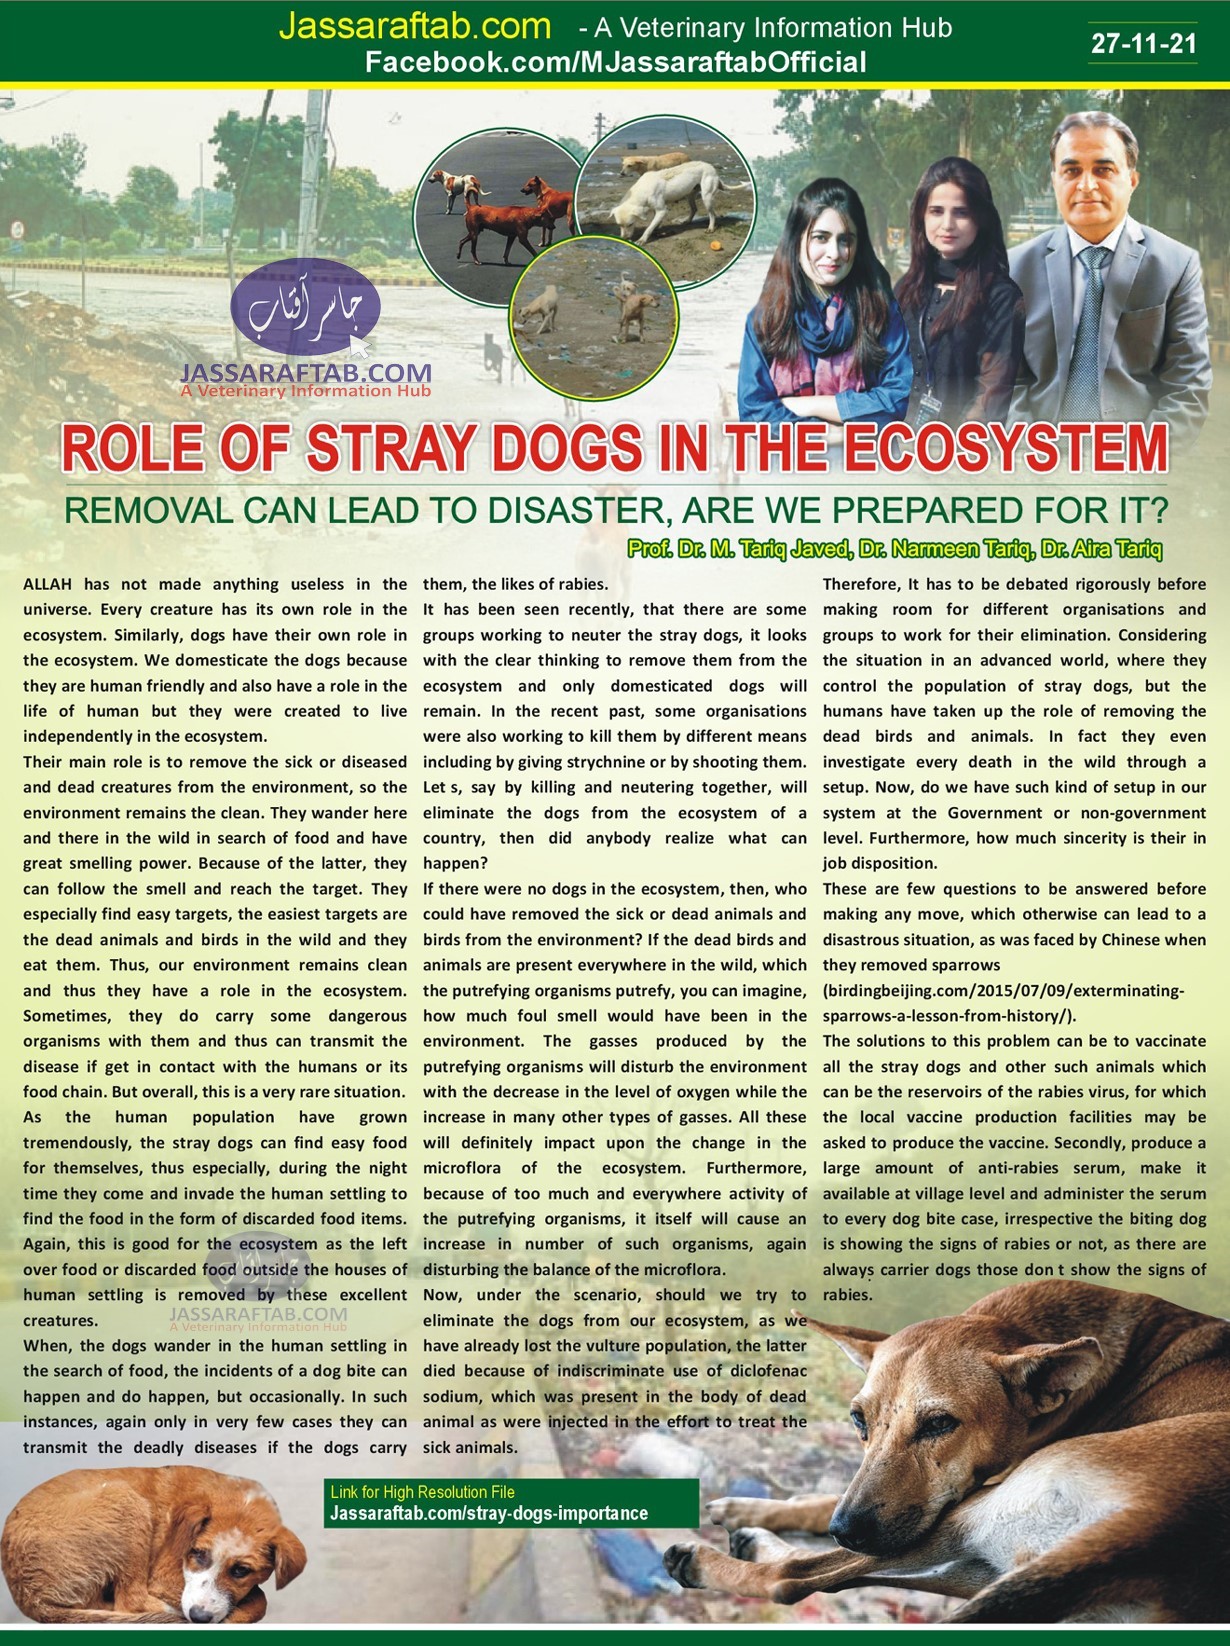 Importance of stray Dogs in ecosystem